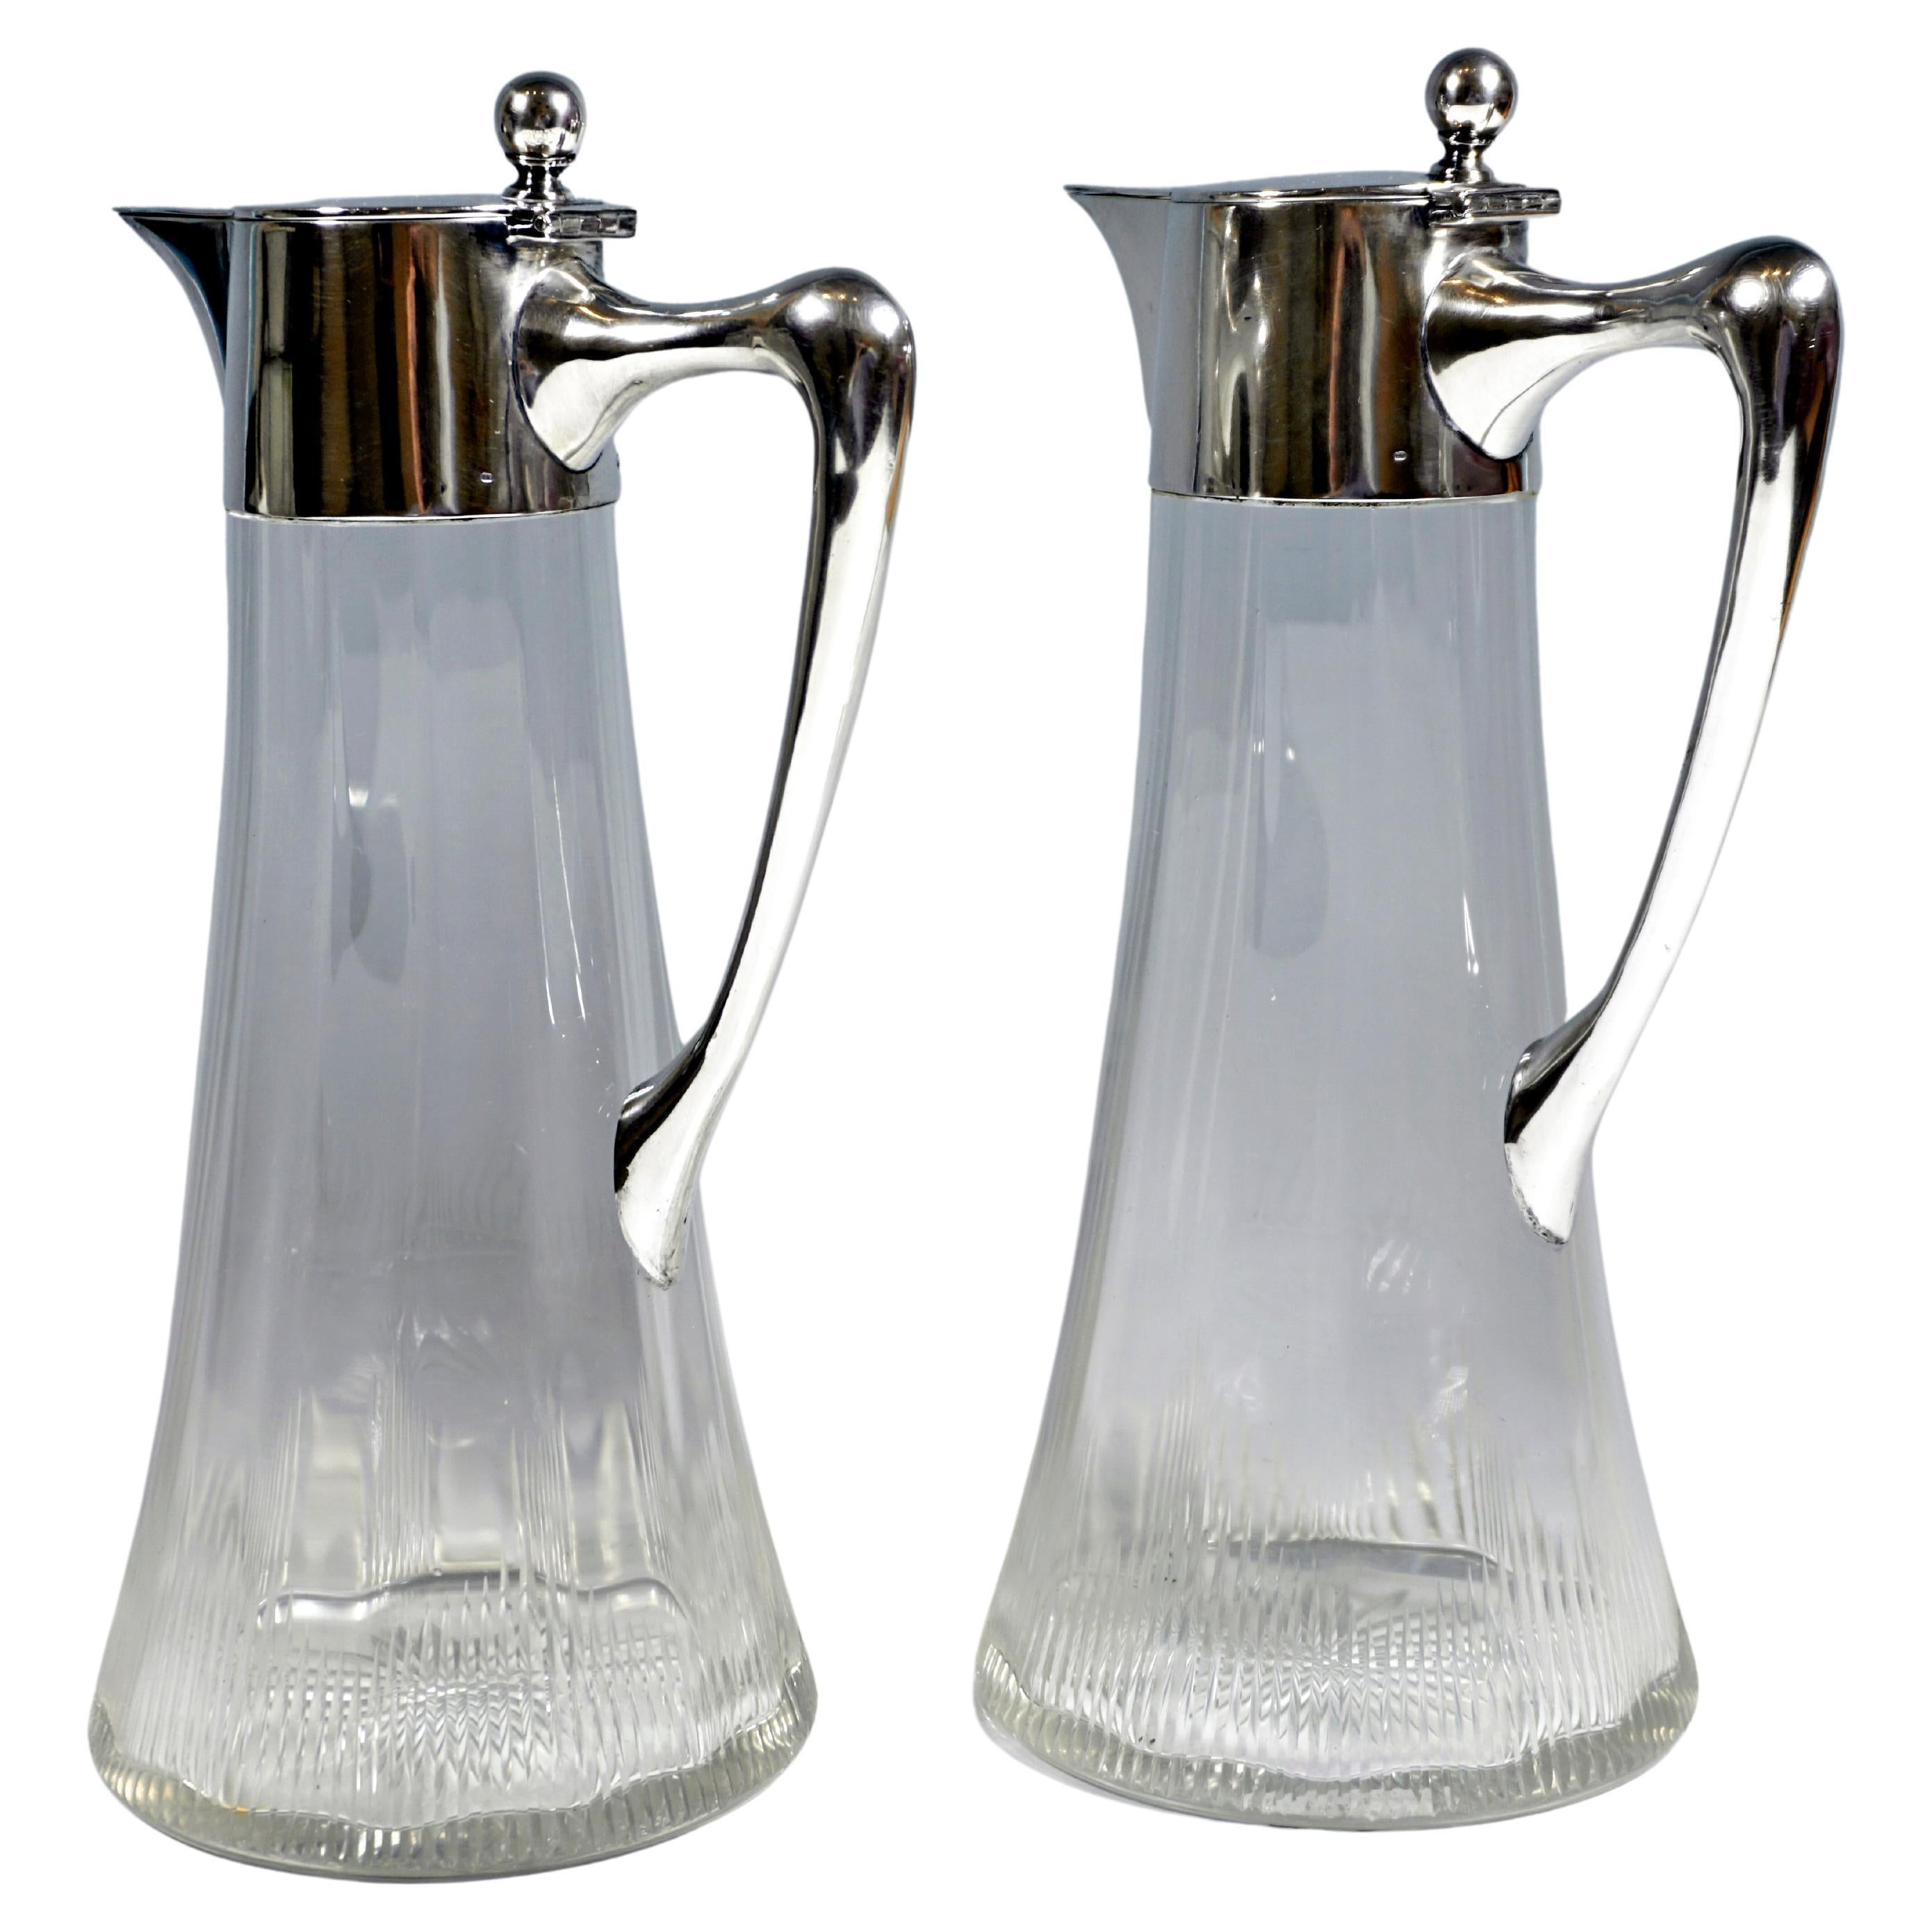 Pair of Art Nouveau Glass Carafes with Silver Fittings, by Ferdinand Vogl Vienna